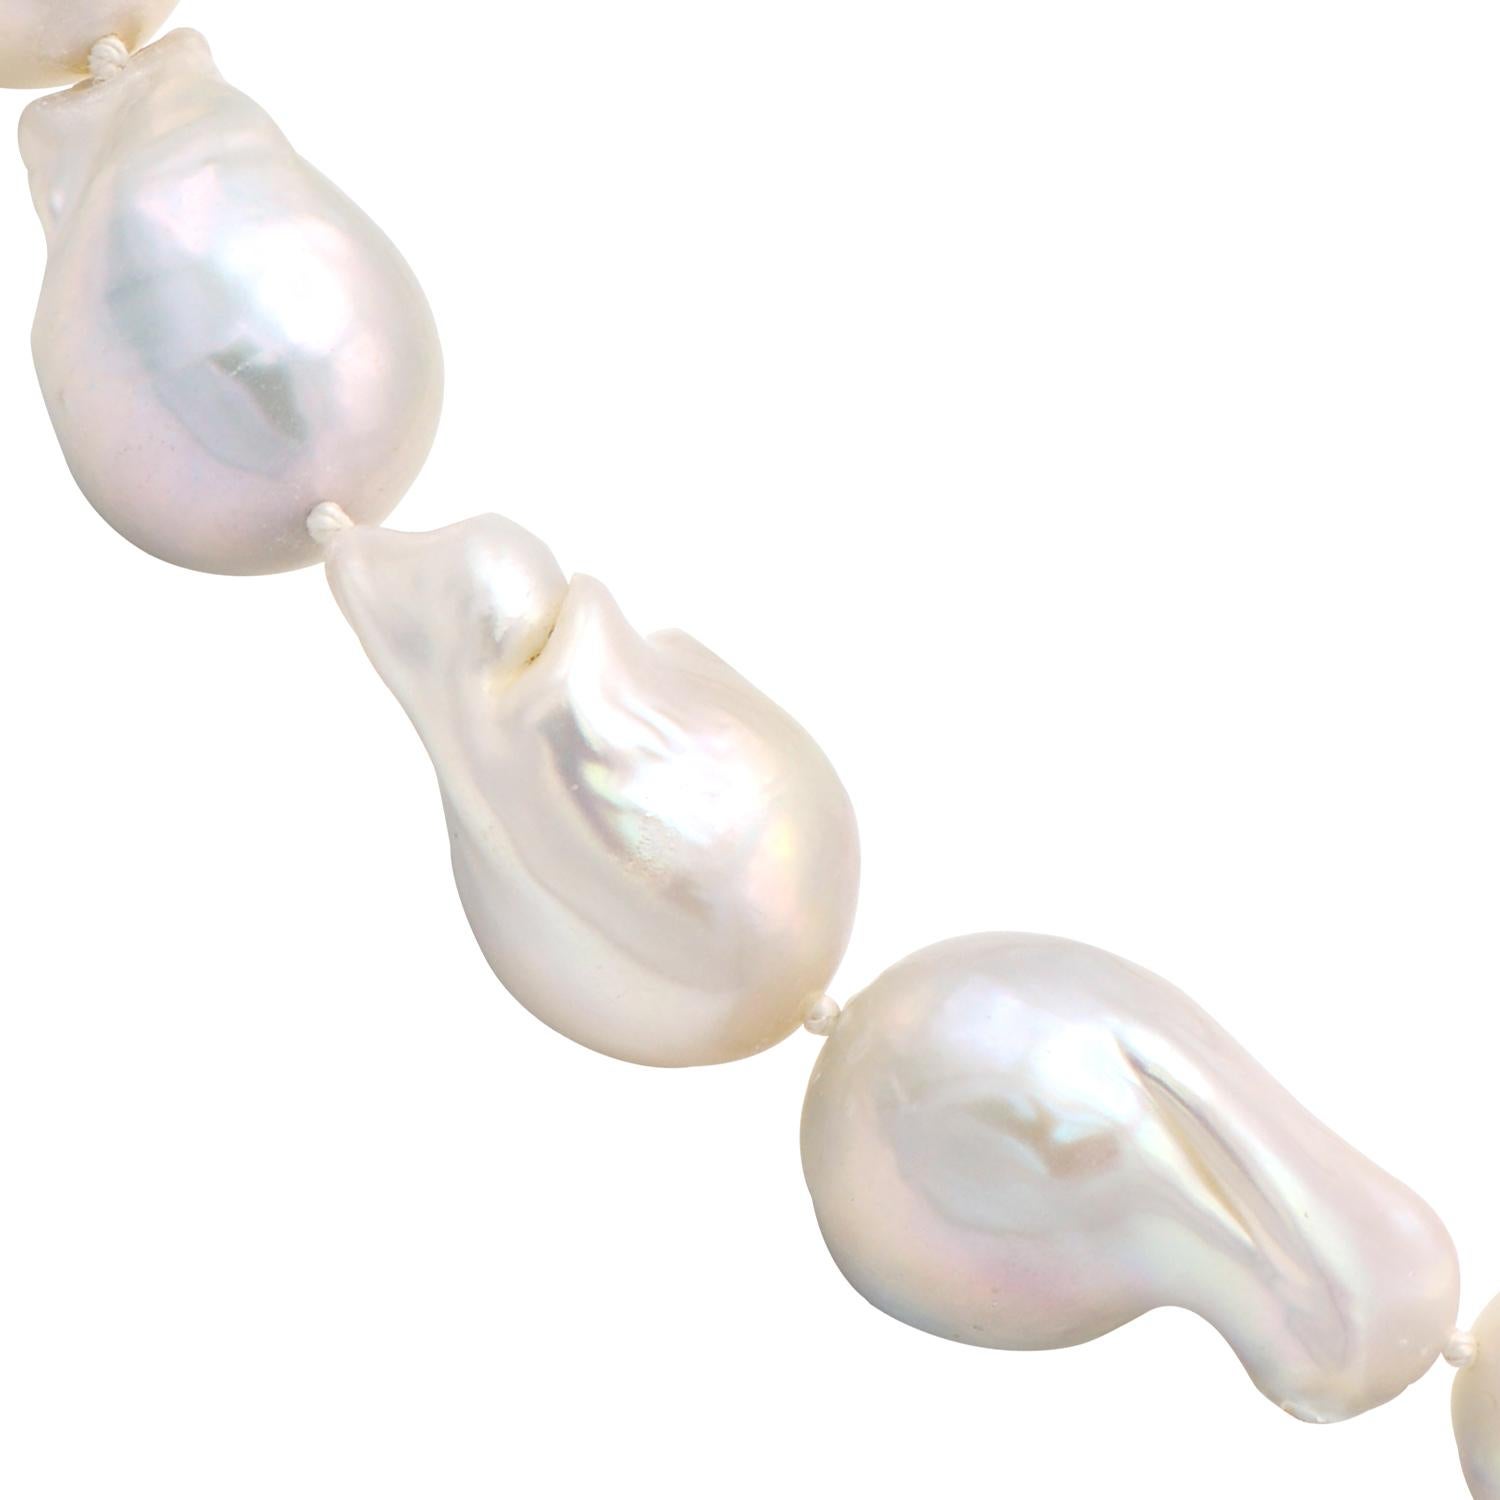 Mixed Cut Baroque White Freshwater Pearl Necklace with 14 Karat White Gold Clasp For Sale